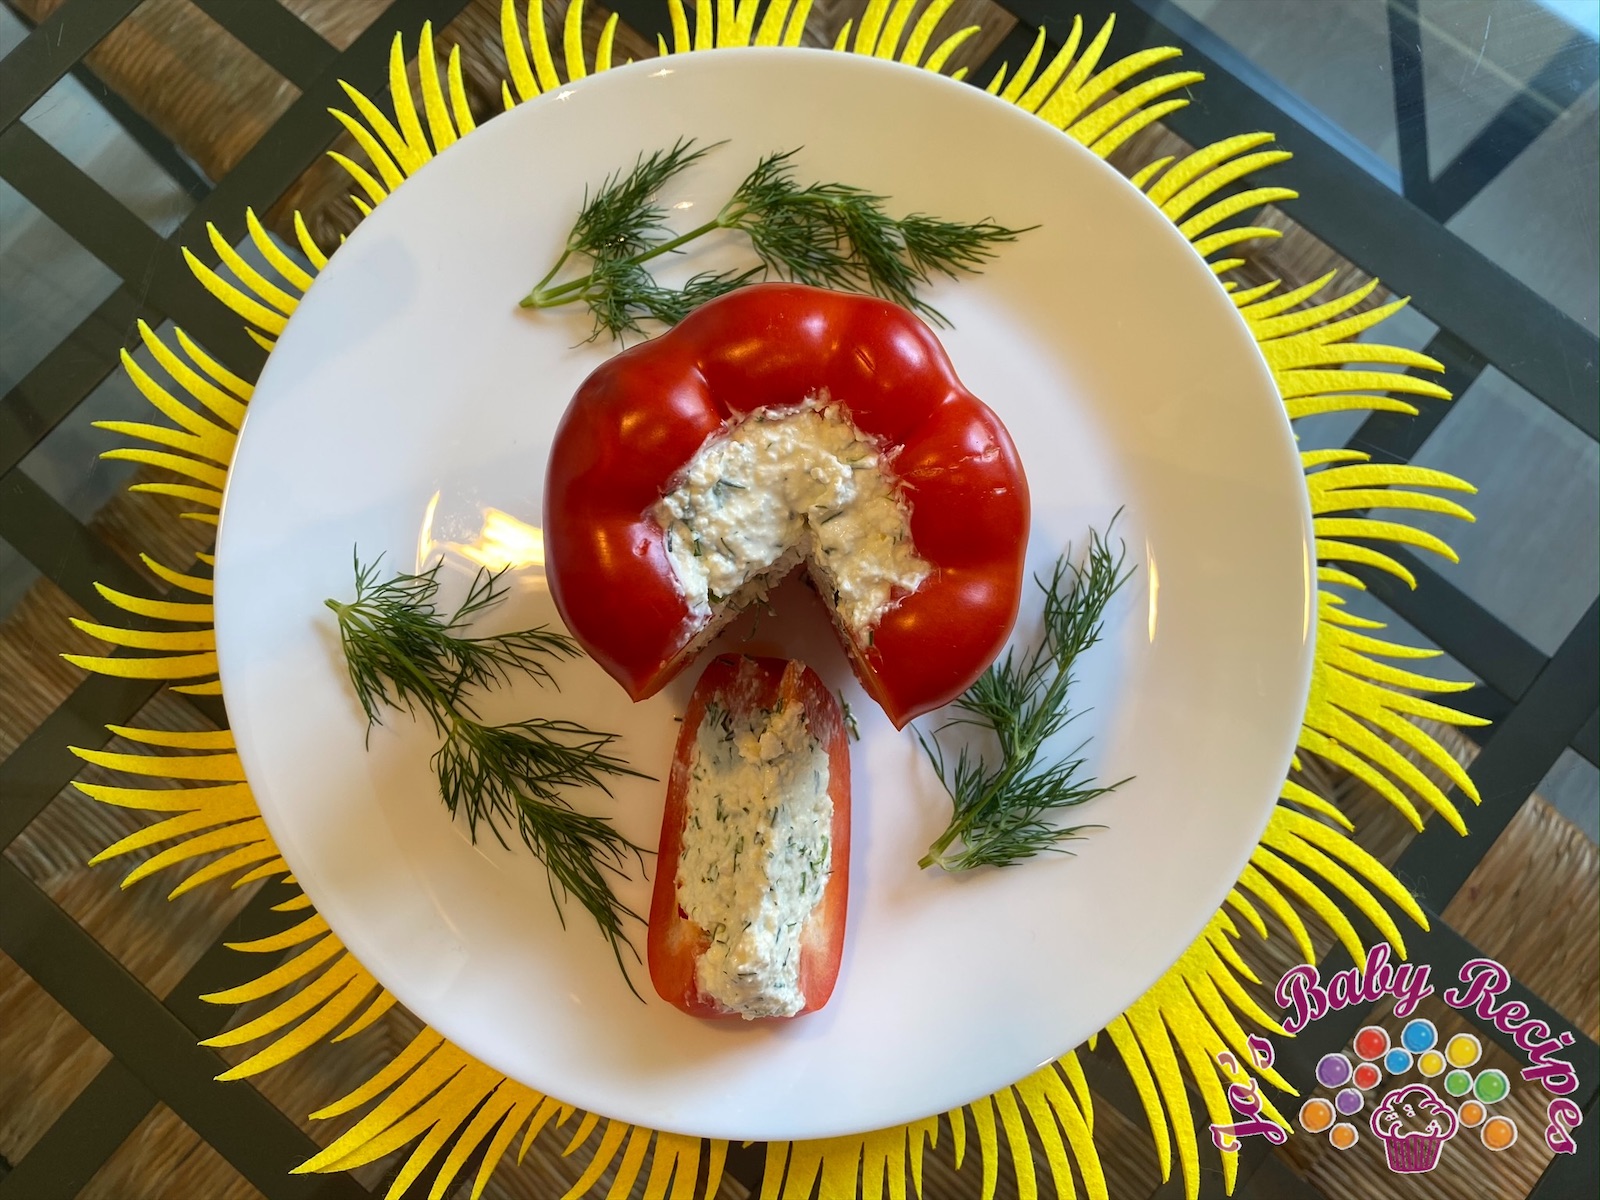 Red Pepper stuffed with Creamy Cheese